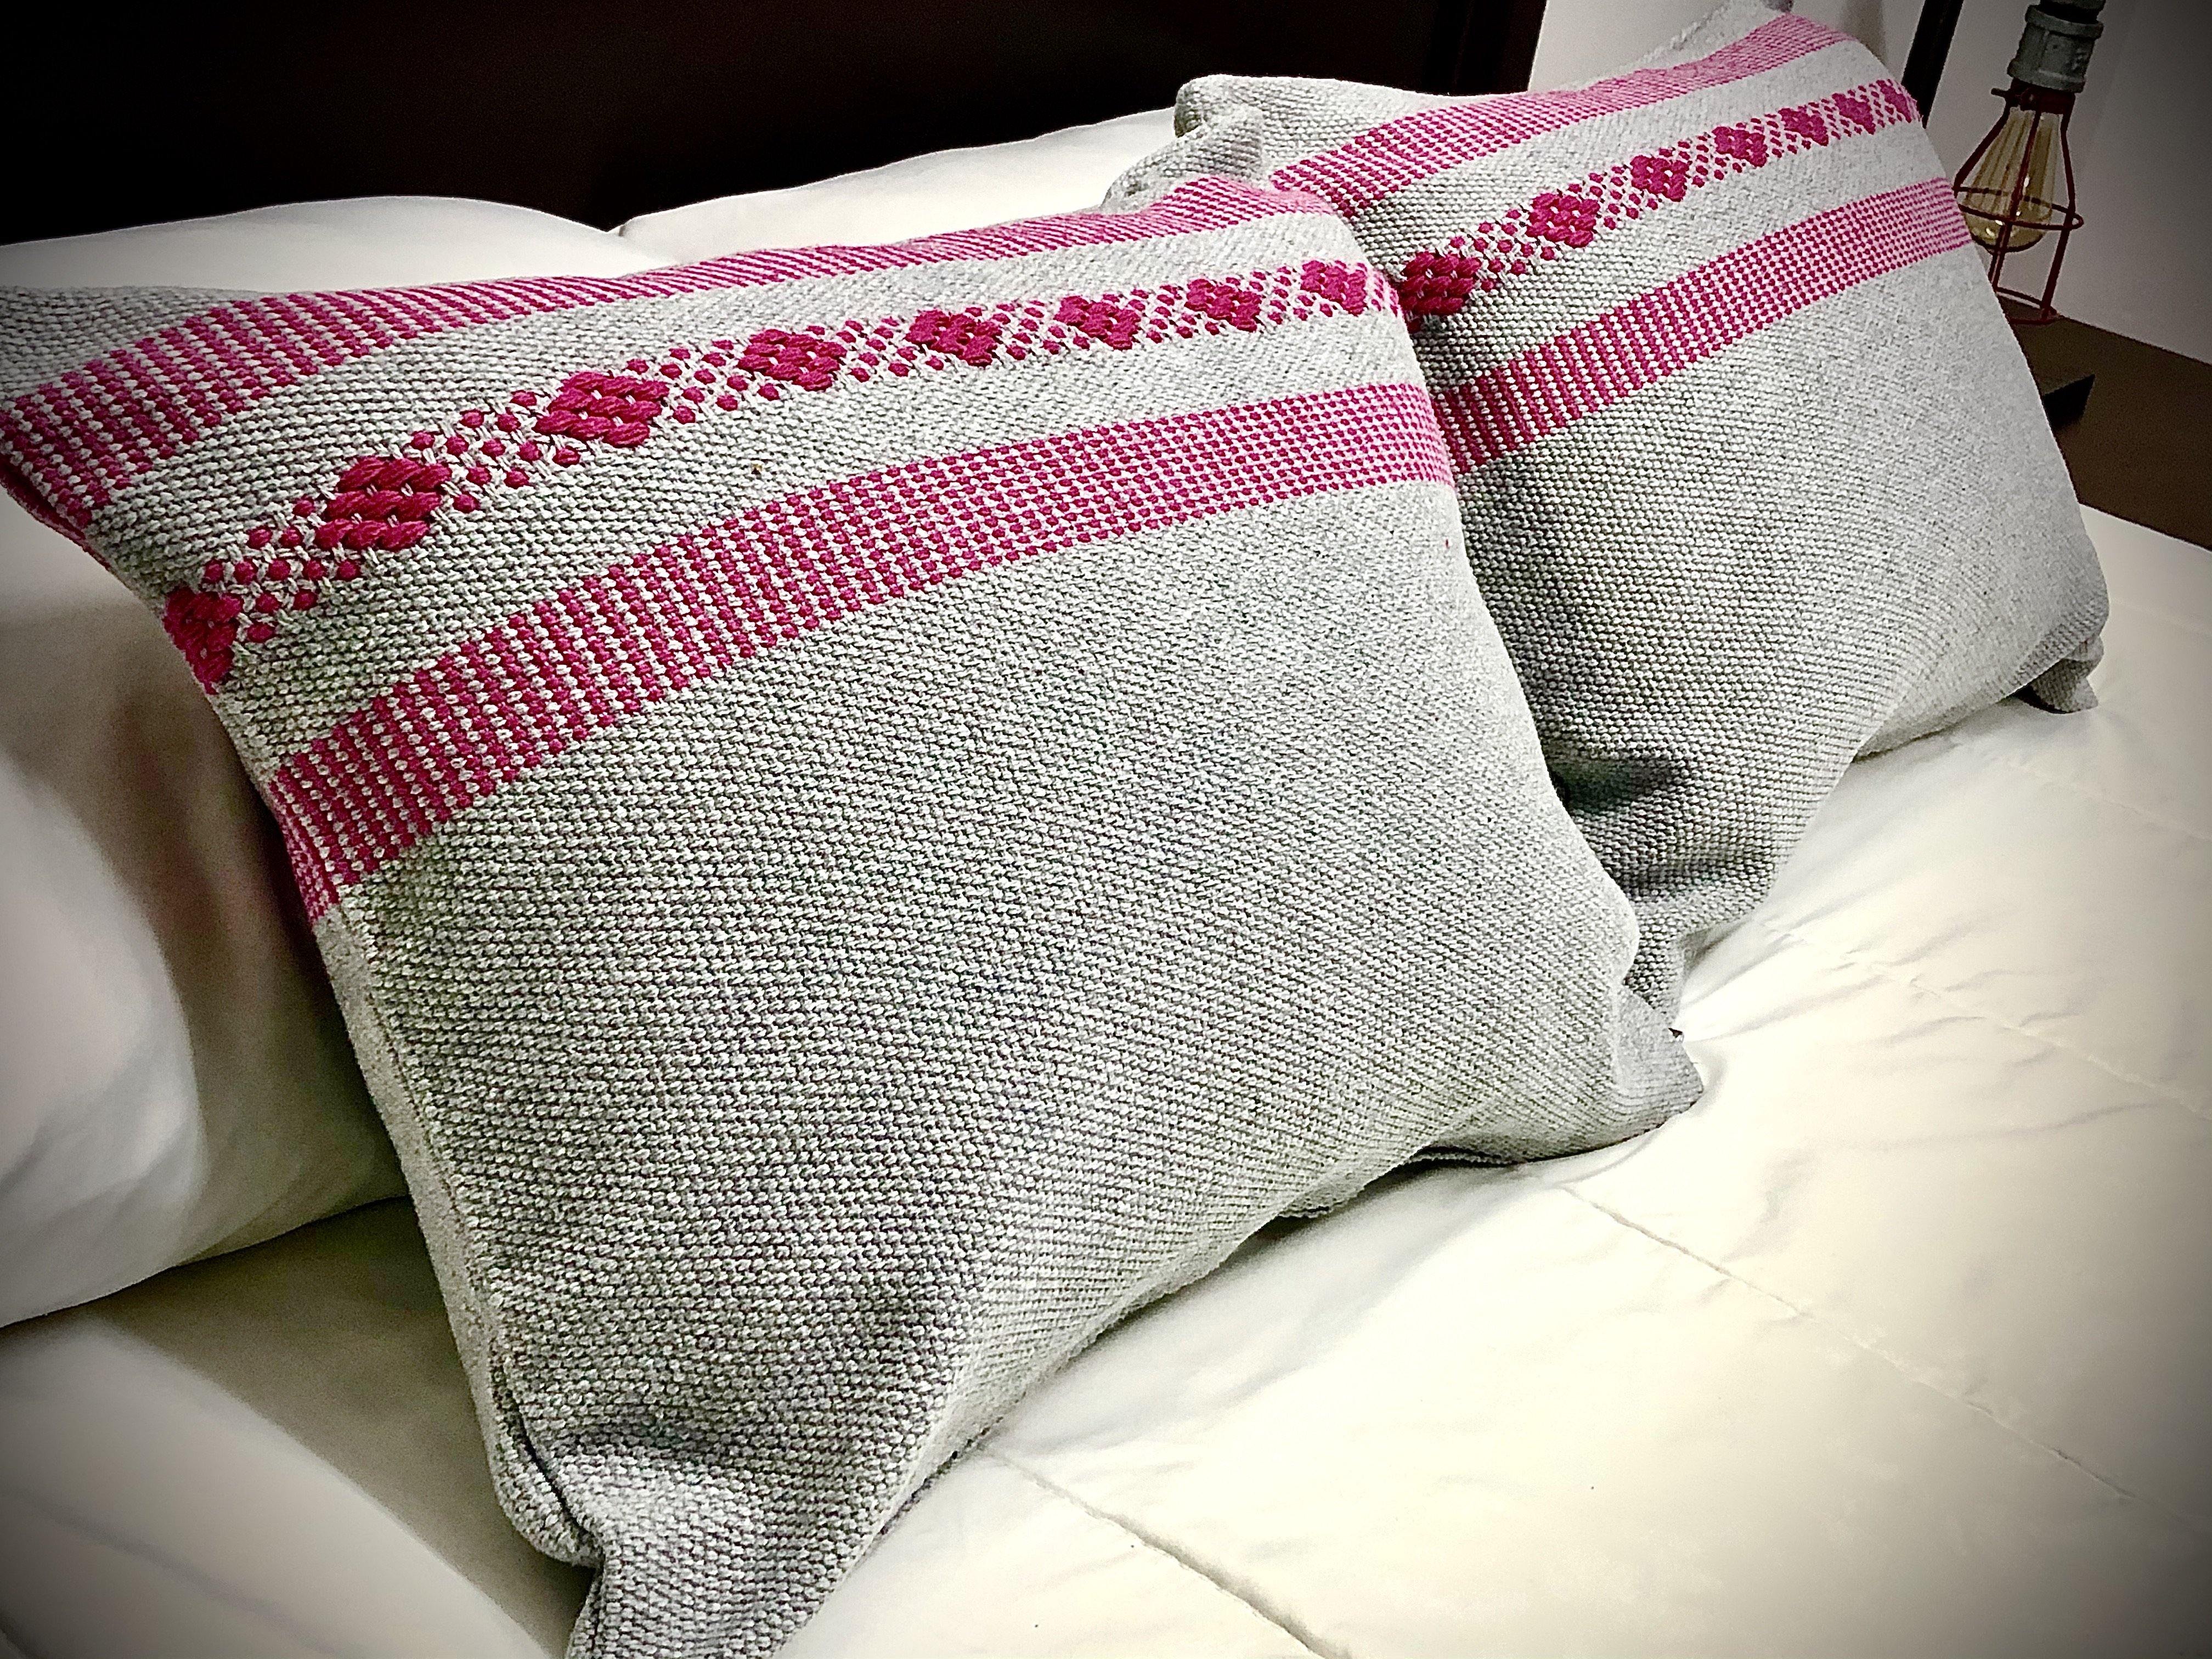 Backstrap-Loomed Decorative Pillow Cases (Set of 2) - HomageMade 